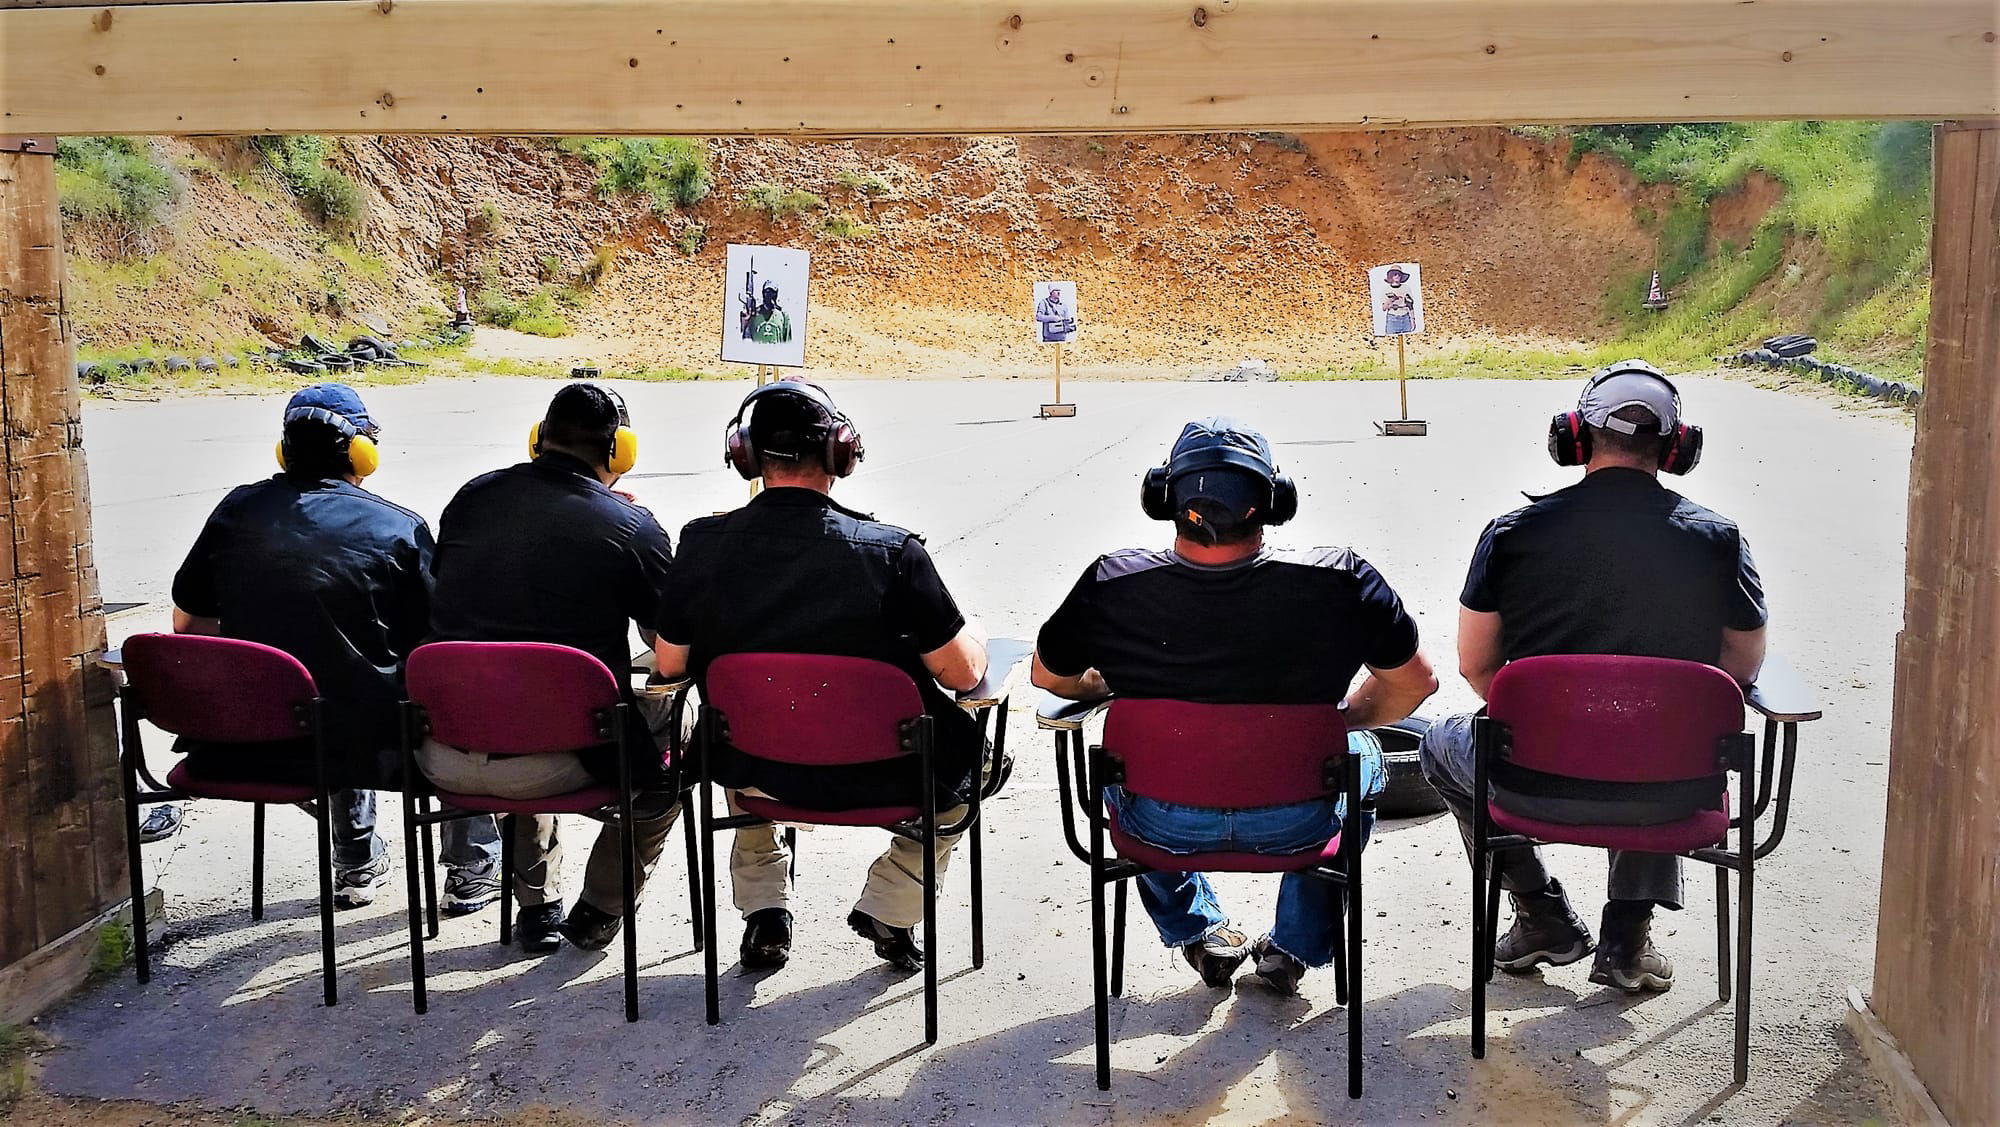 Shooting instructors course - challenge and response